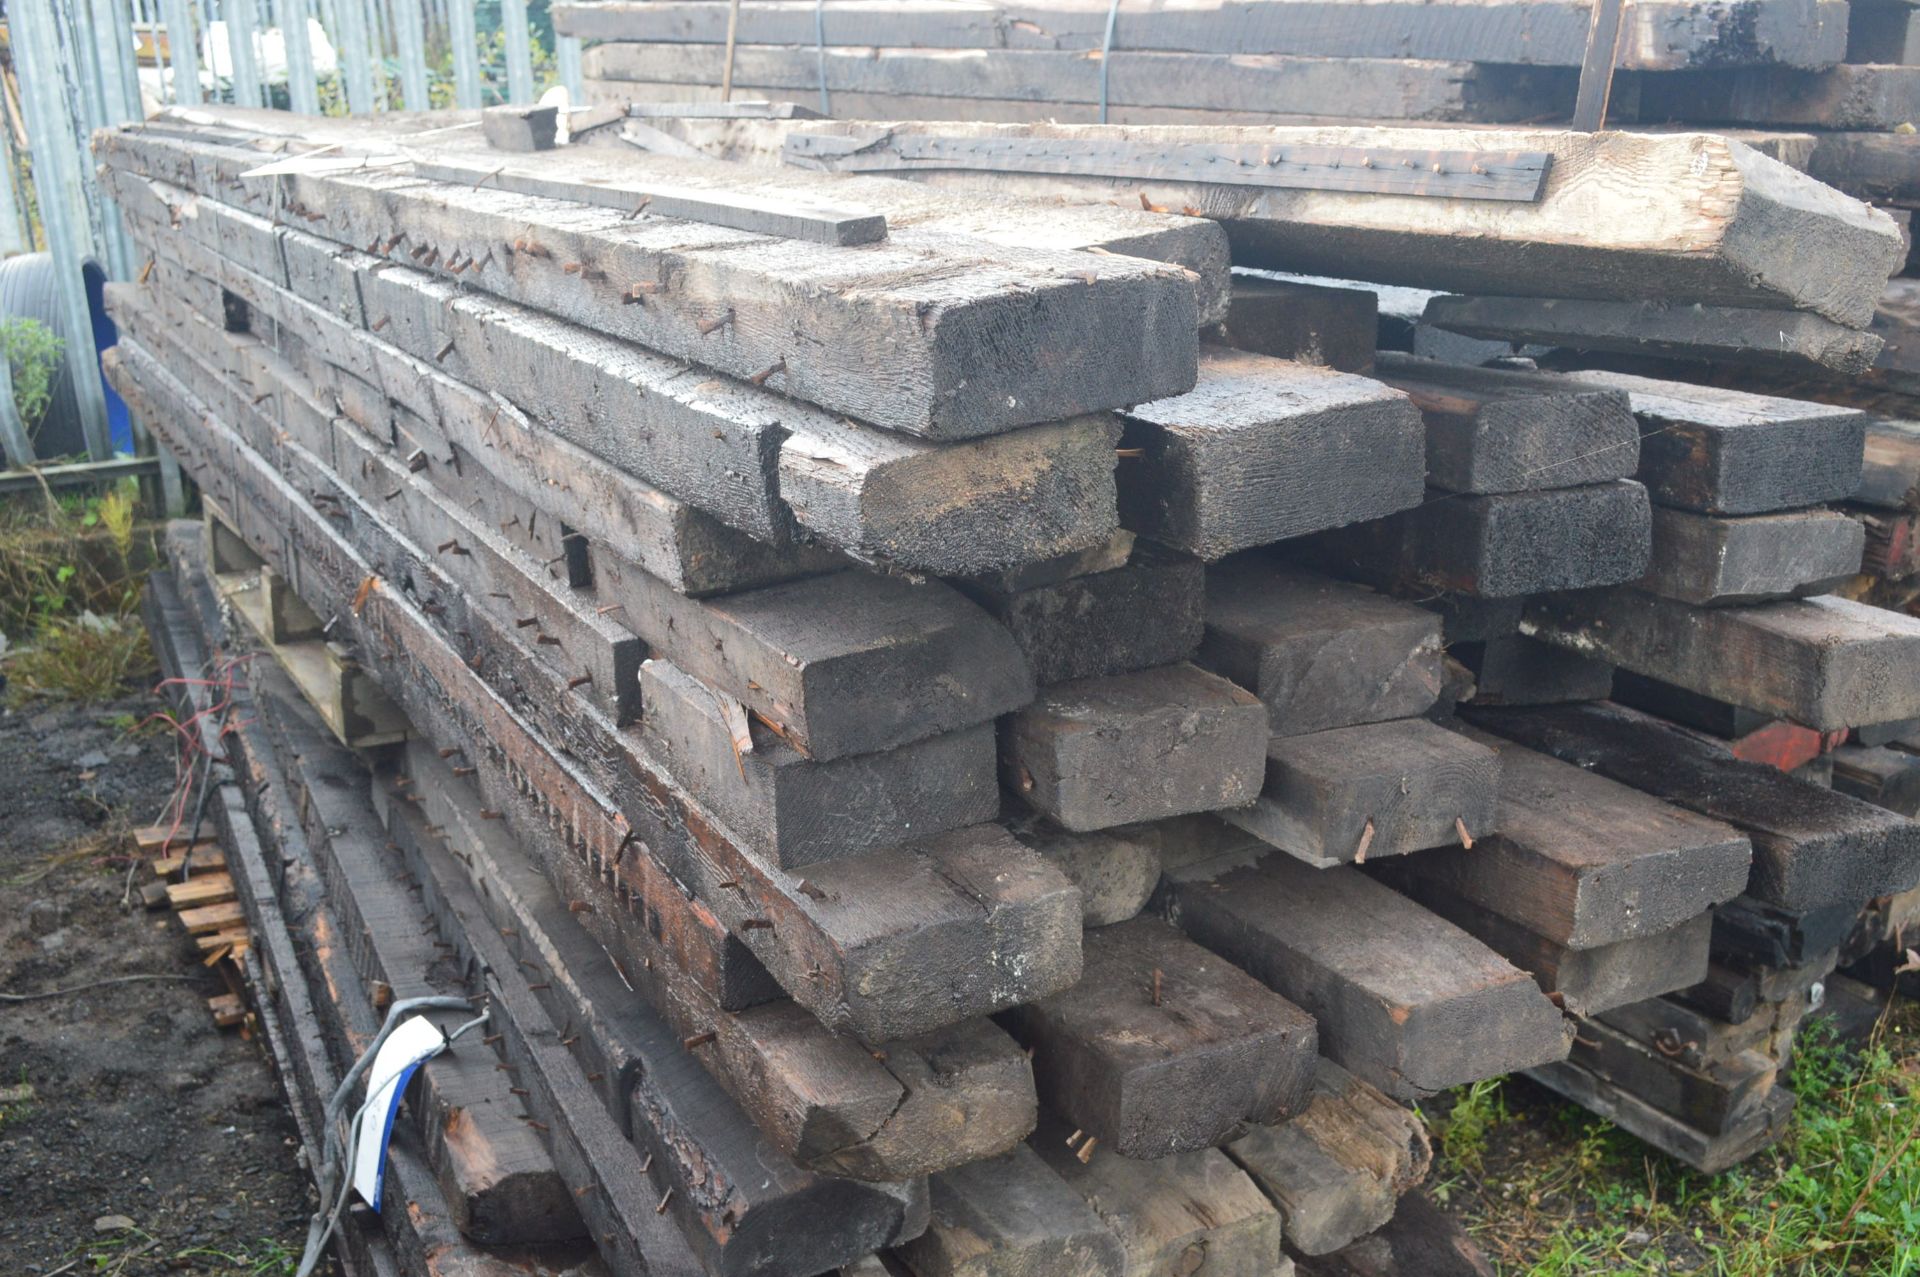 Assorted Lengths of Timber, as set out on pallet, up to approx. 4.6m (lot located at Moorfield